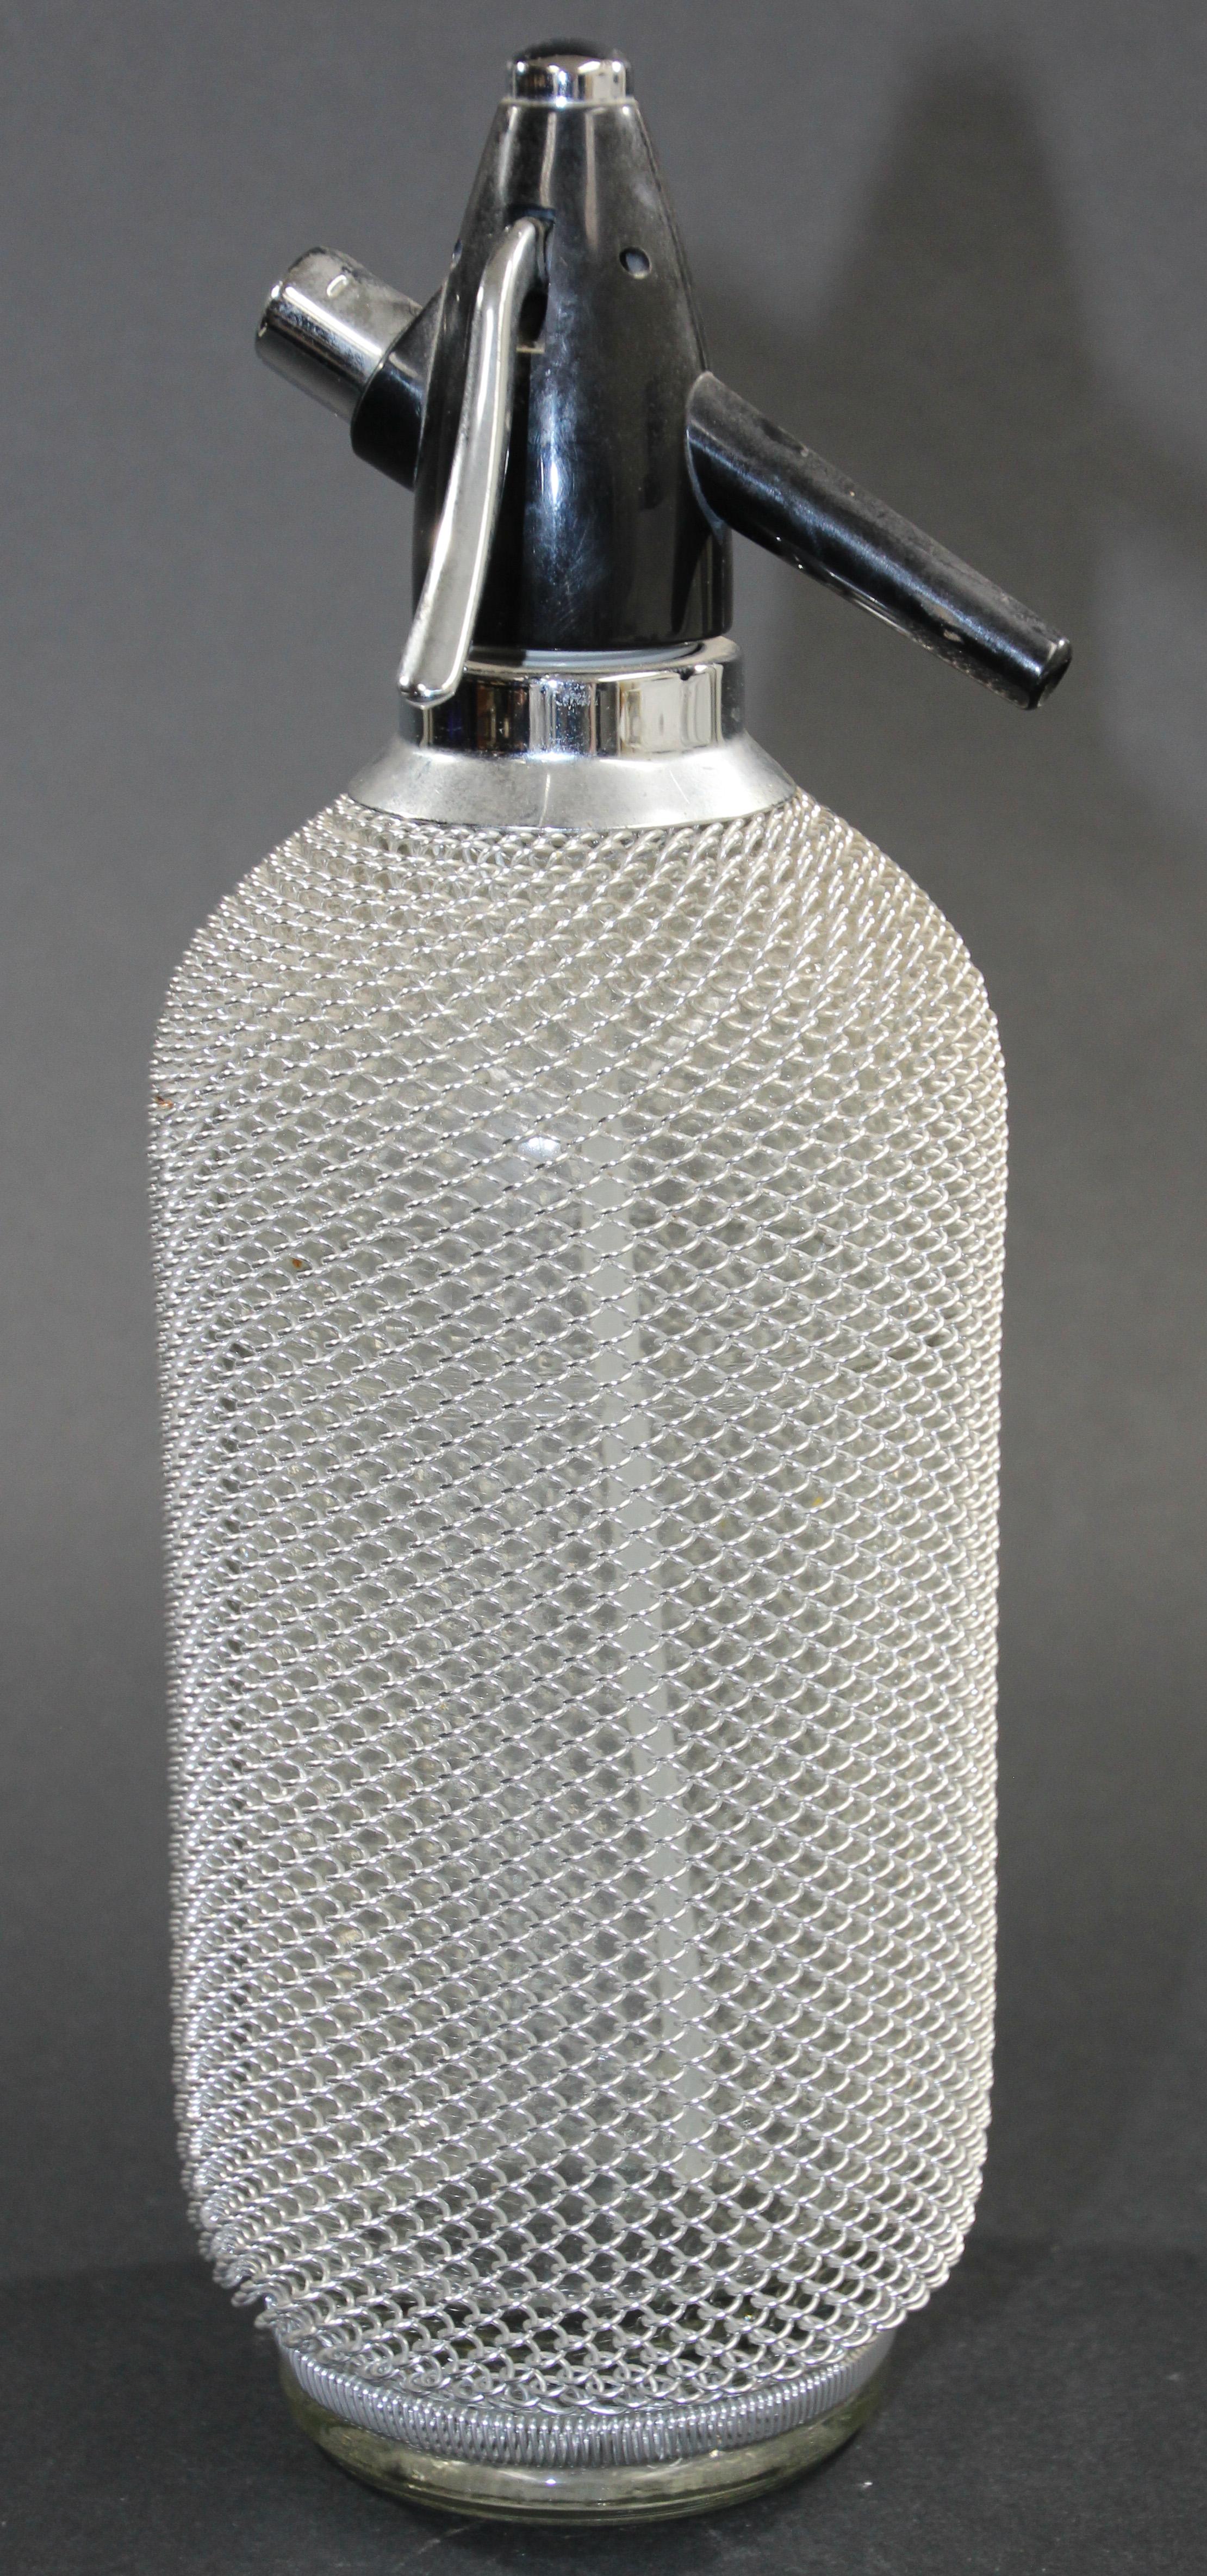 Vintage Classic Soda Siphon Seltzer Glass Bottle with Wire Mesh 1